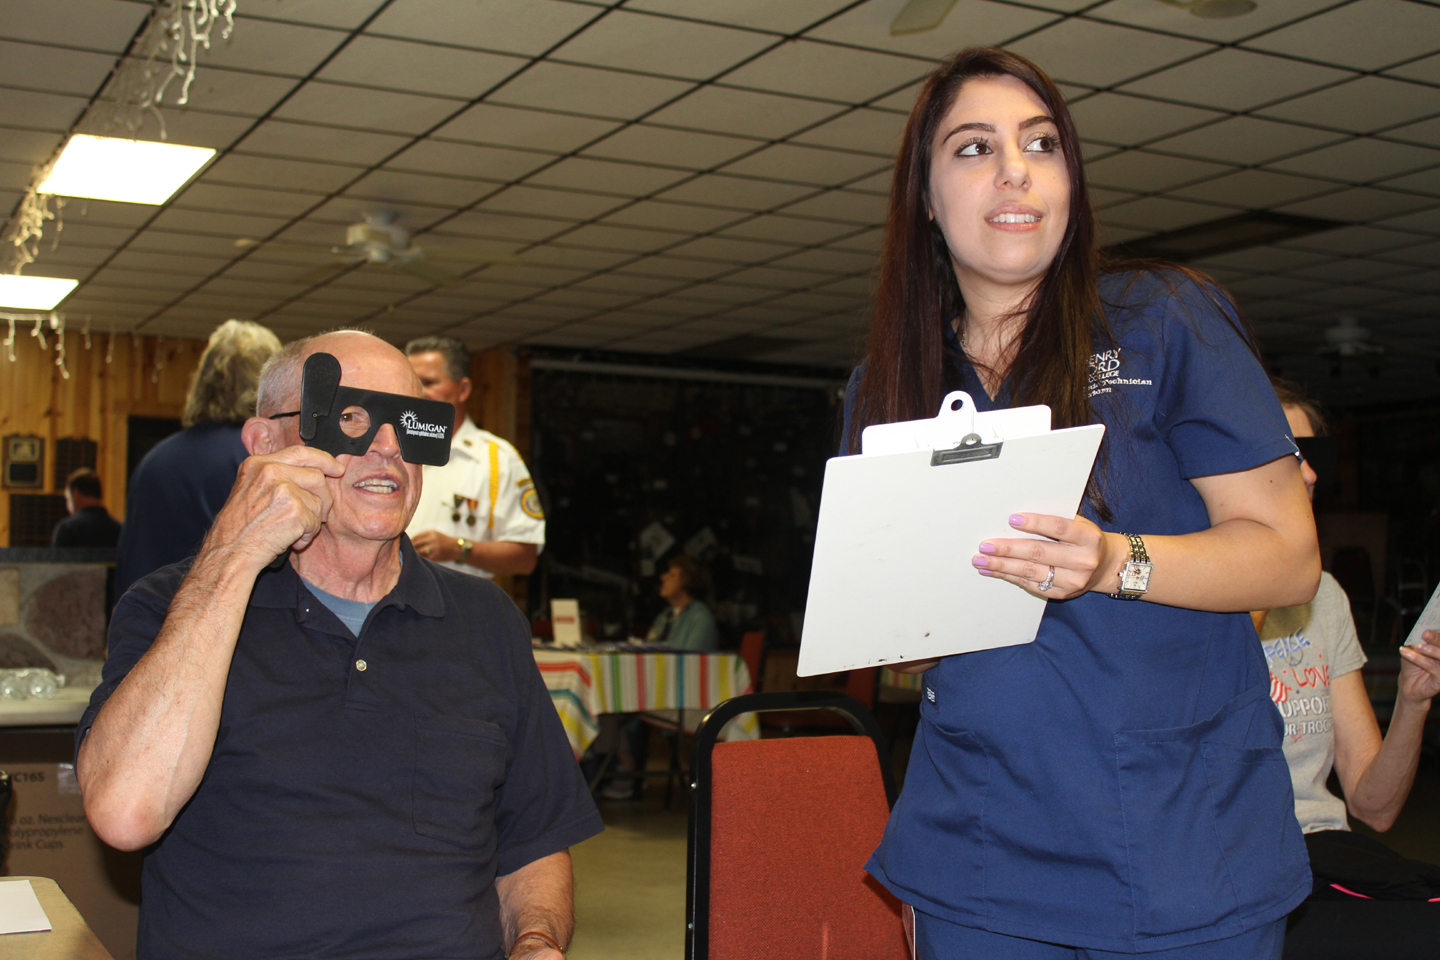 Anyone who wants a free eye exam will be able to get one on Oct. 13 at American Legion Post 108. Photo by C.J. Carnacchio.